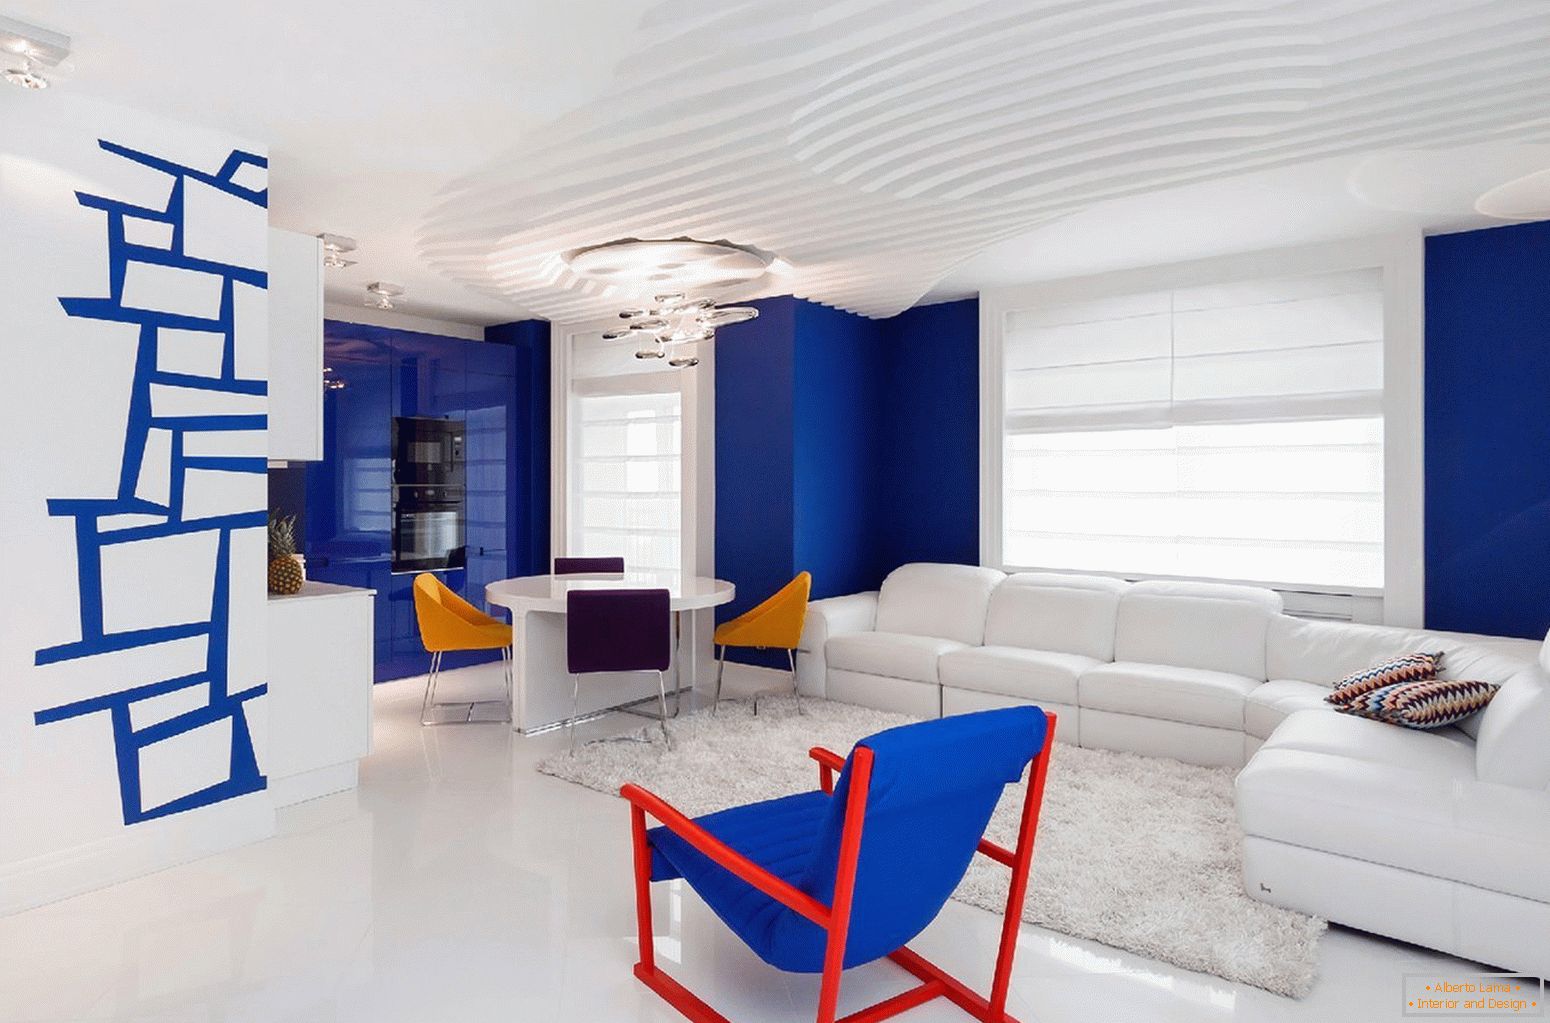 Blue-white walls in the interior